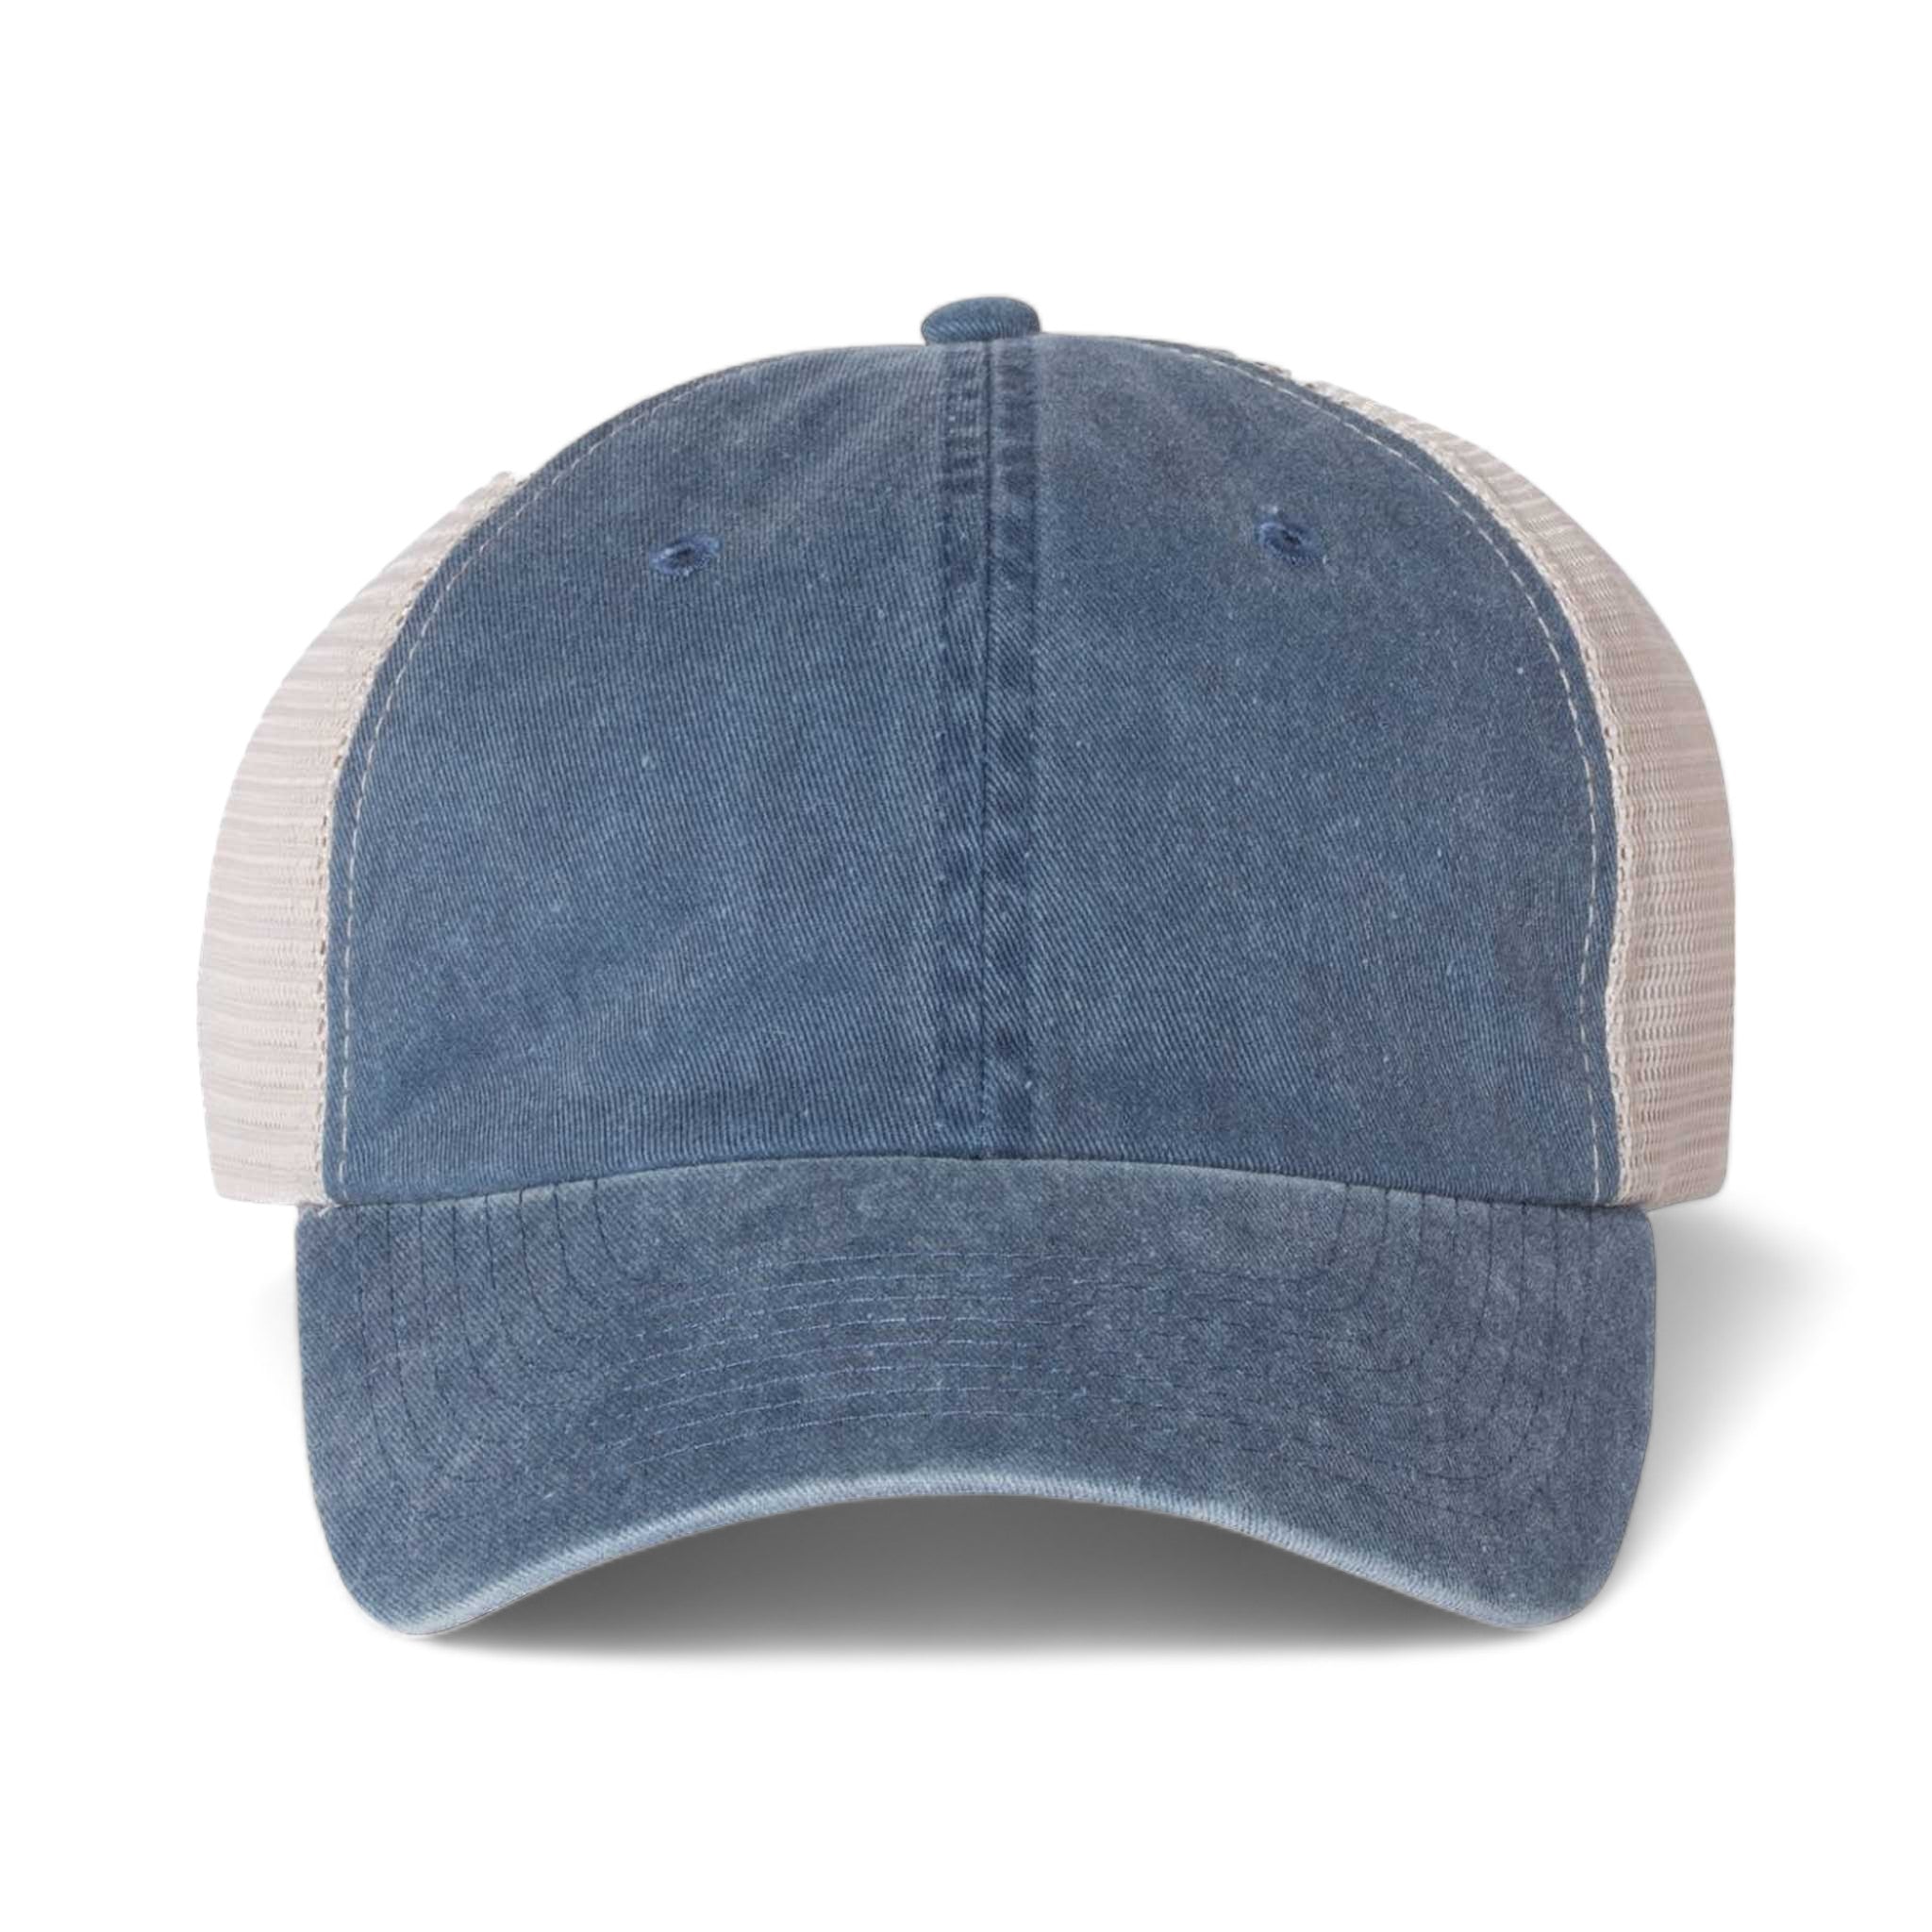 Front view of Sportsman SP510 custom hat in navy and stone